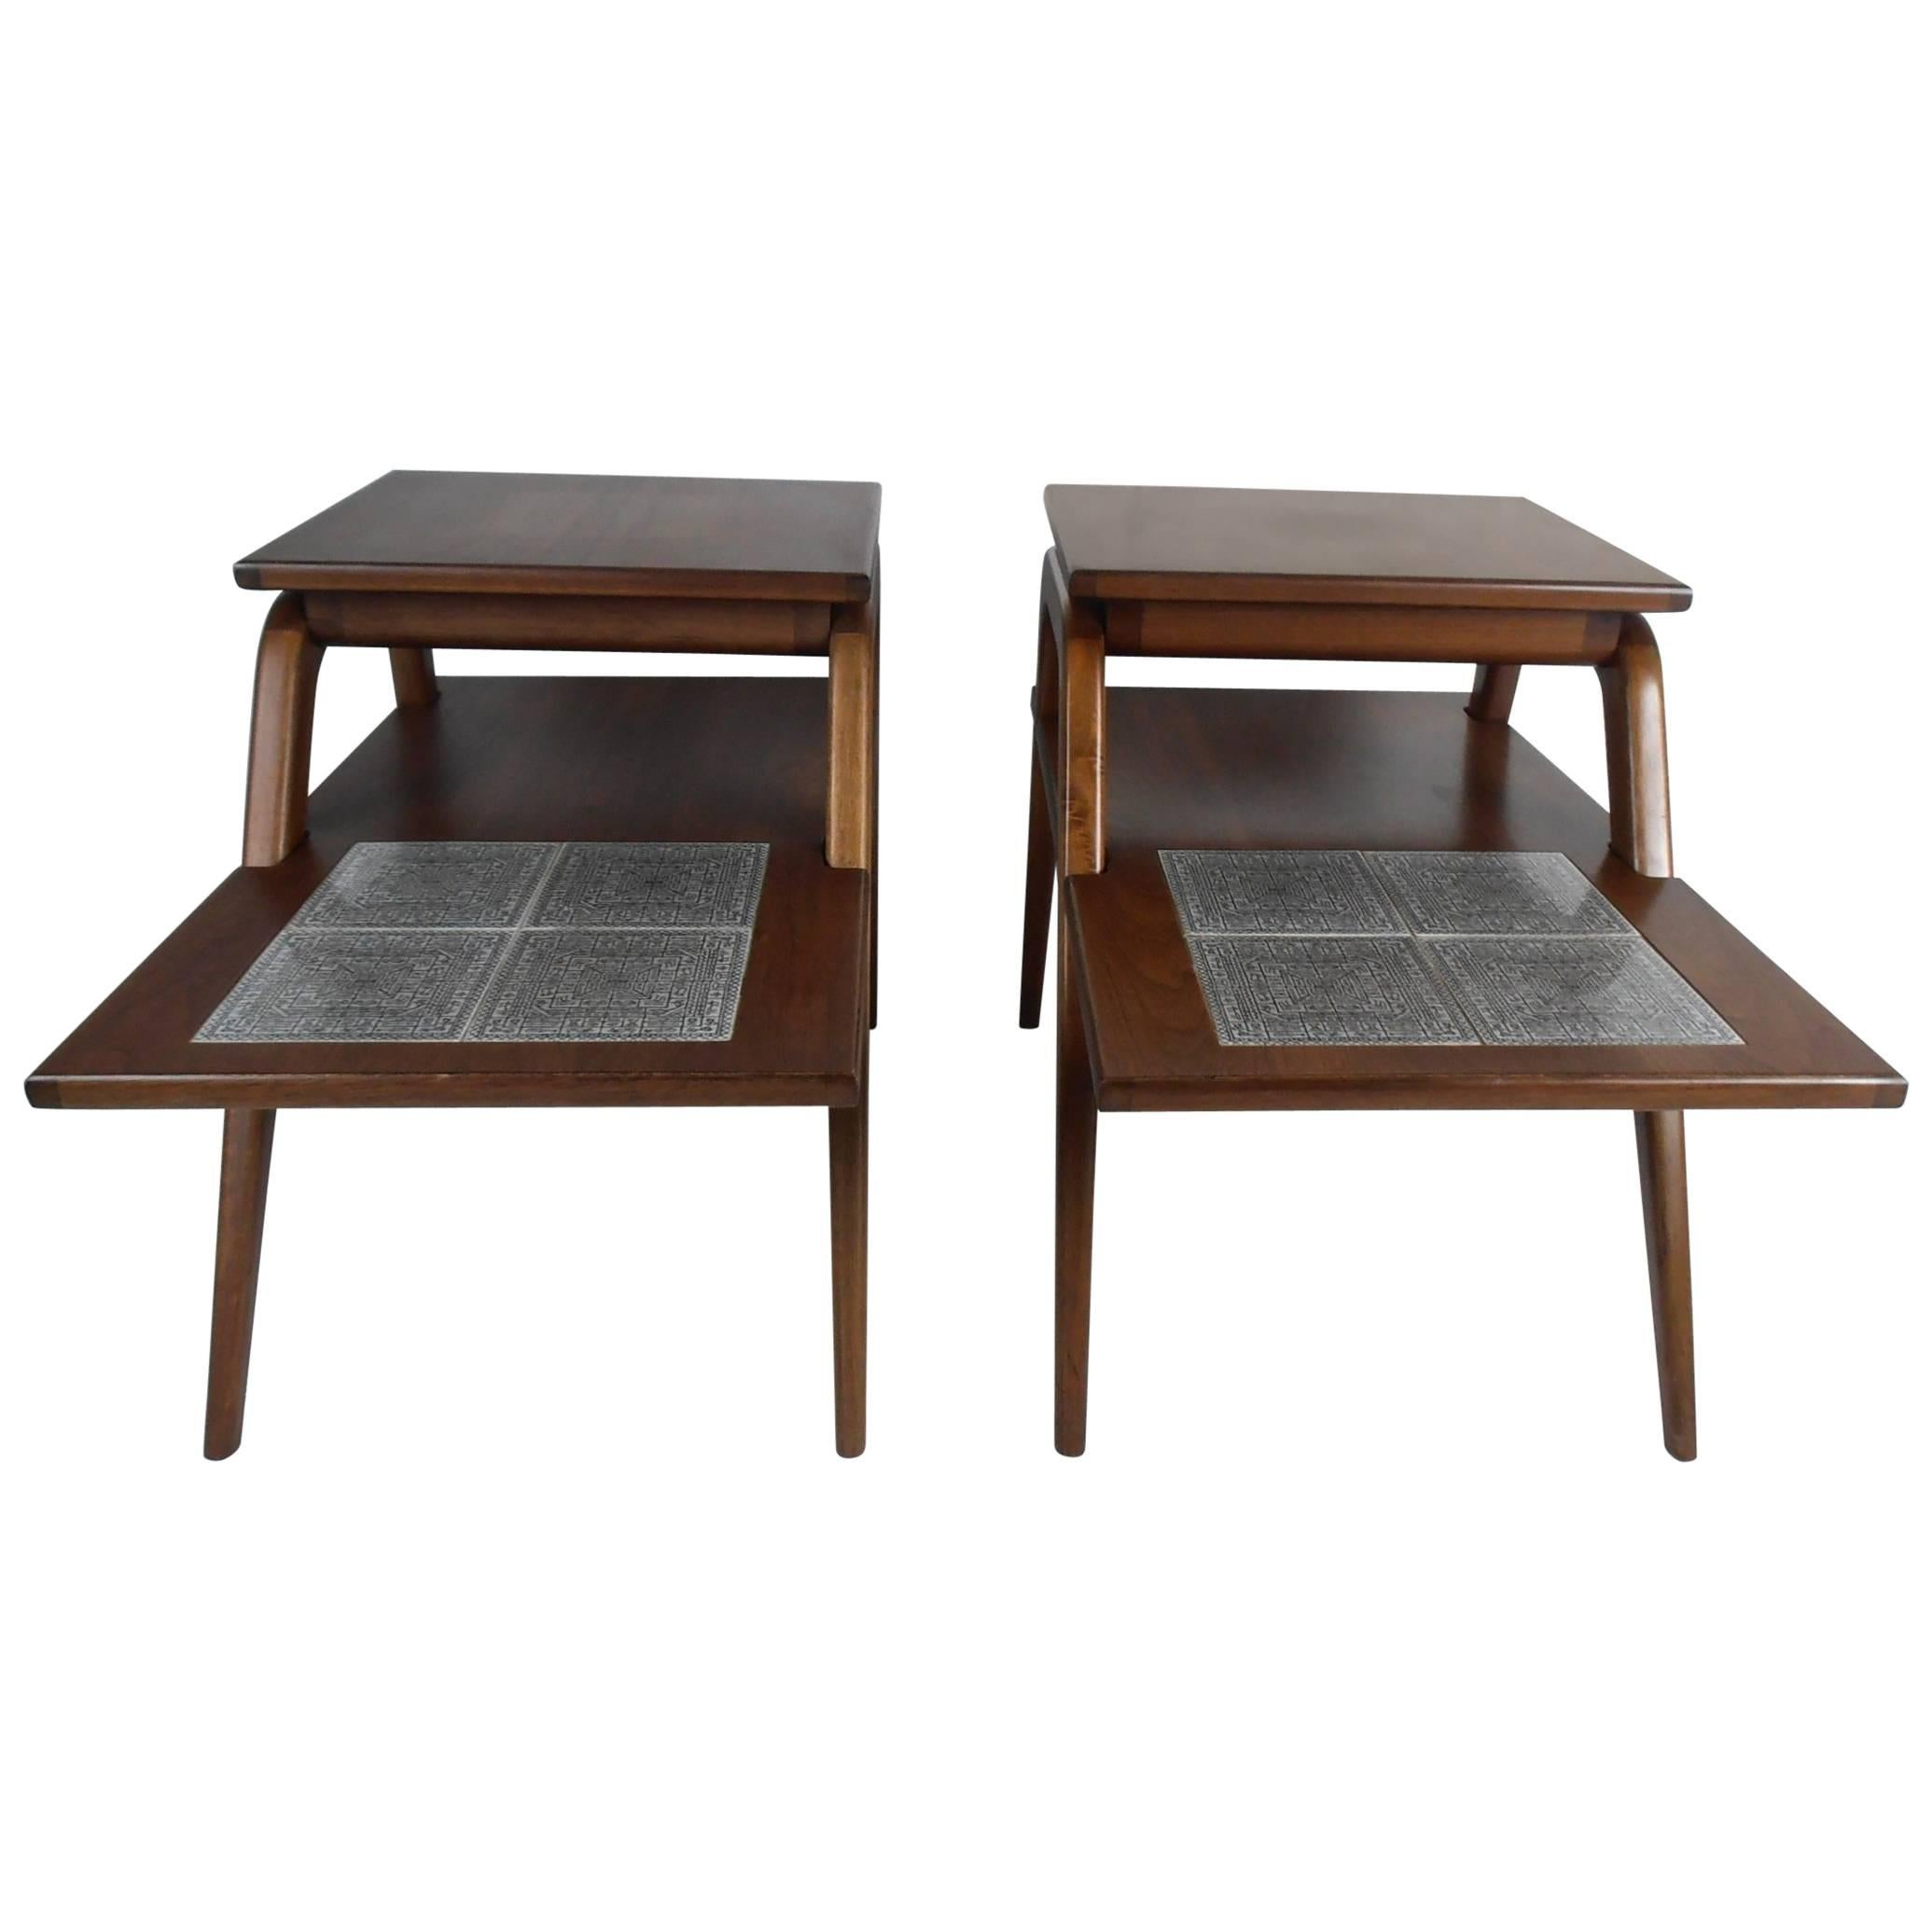 Pair of Mid-Century Modern Two-Tier End Tables with Tile Inlay